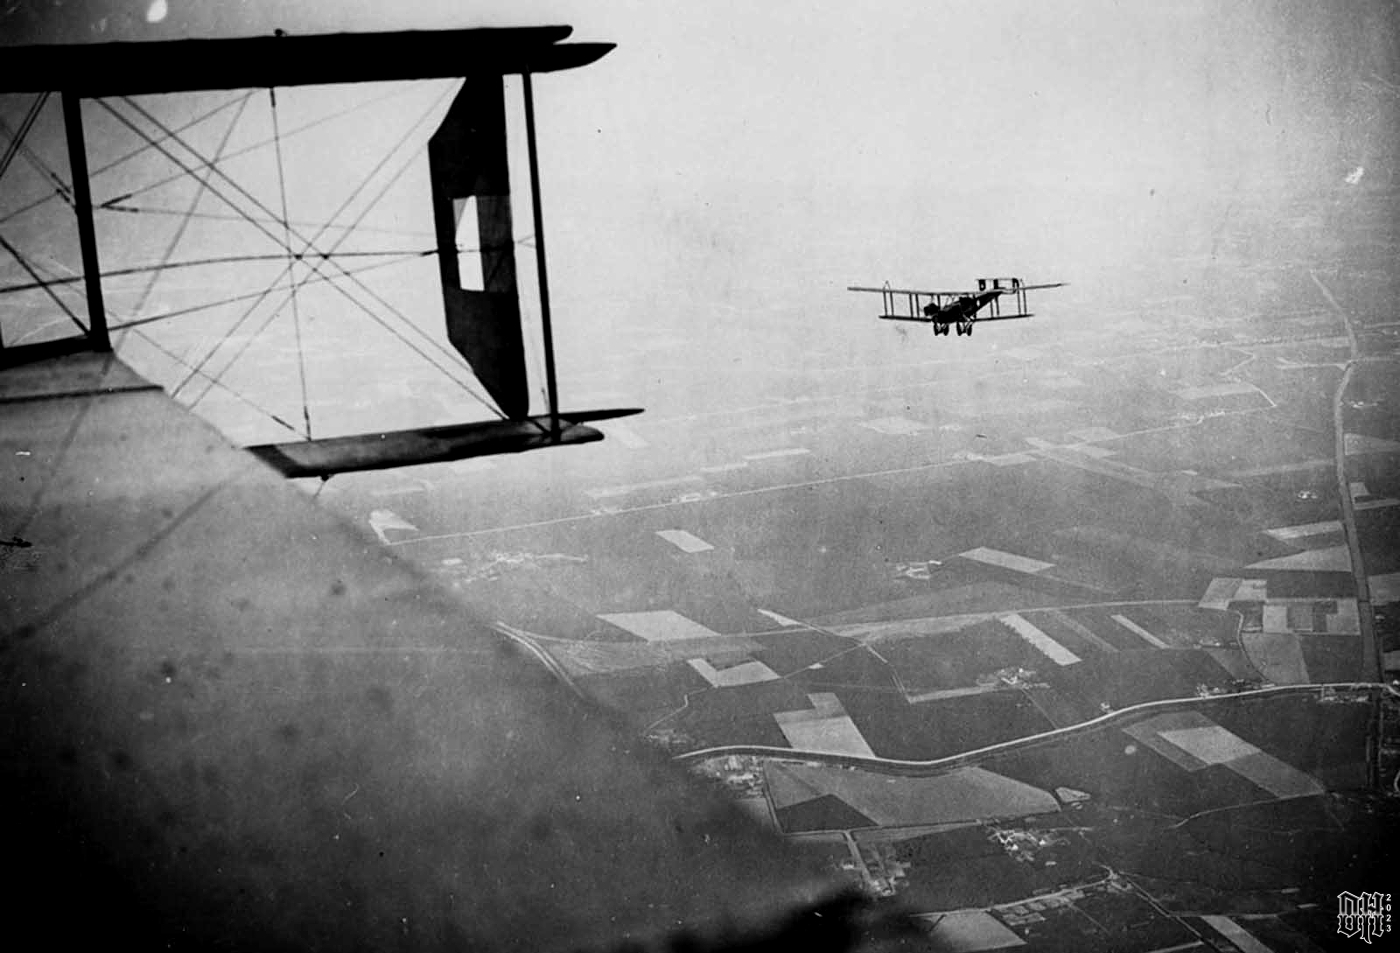 WW1 Planes 4 - British Handley-Page bombers on a mission, Western Front, during World War I.jpg